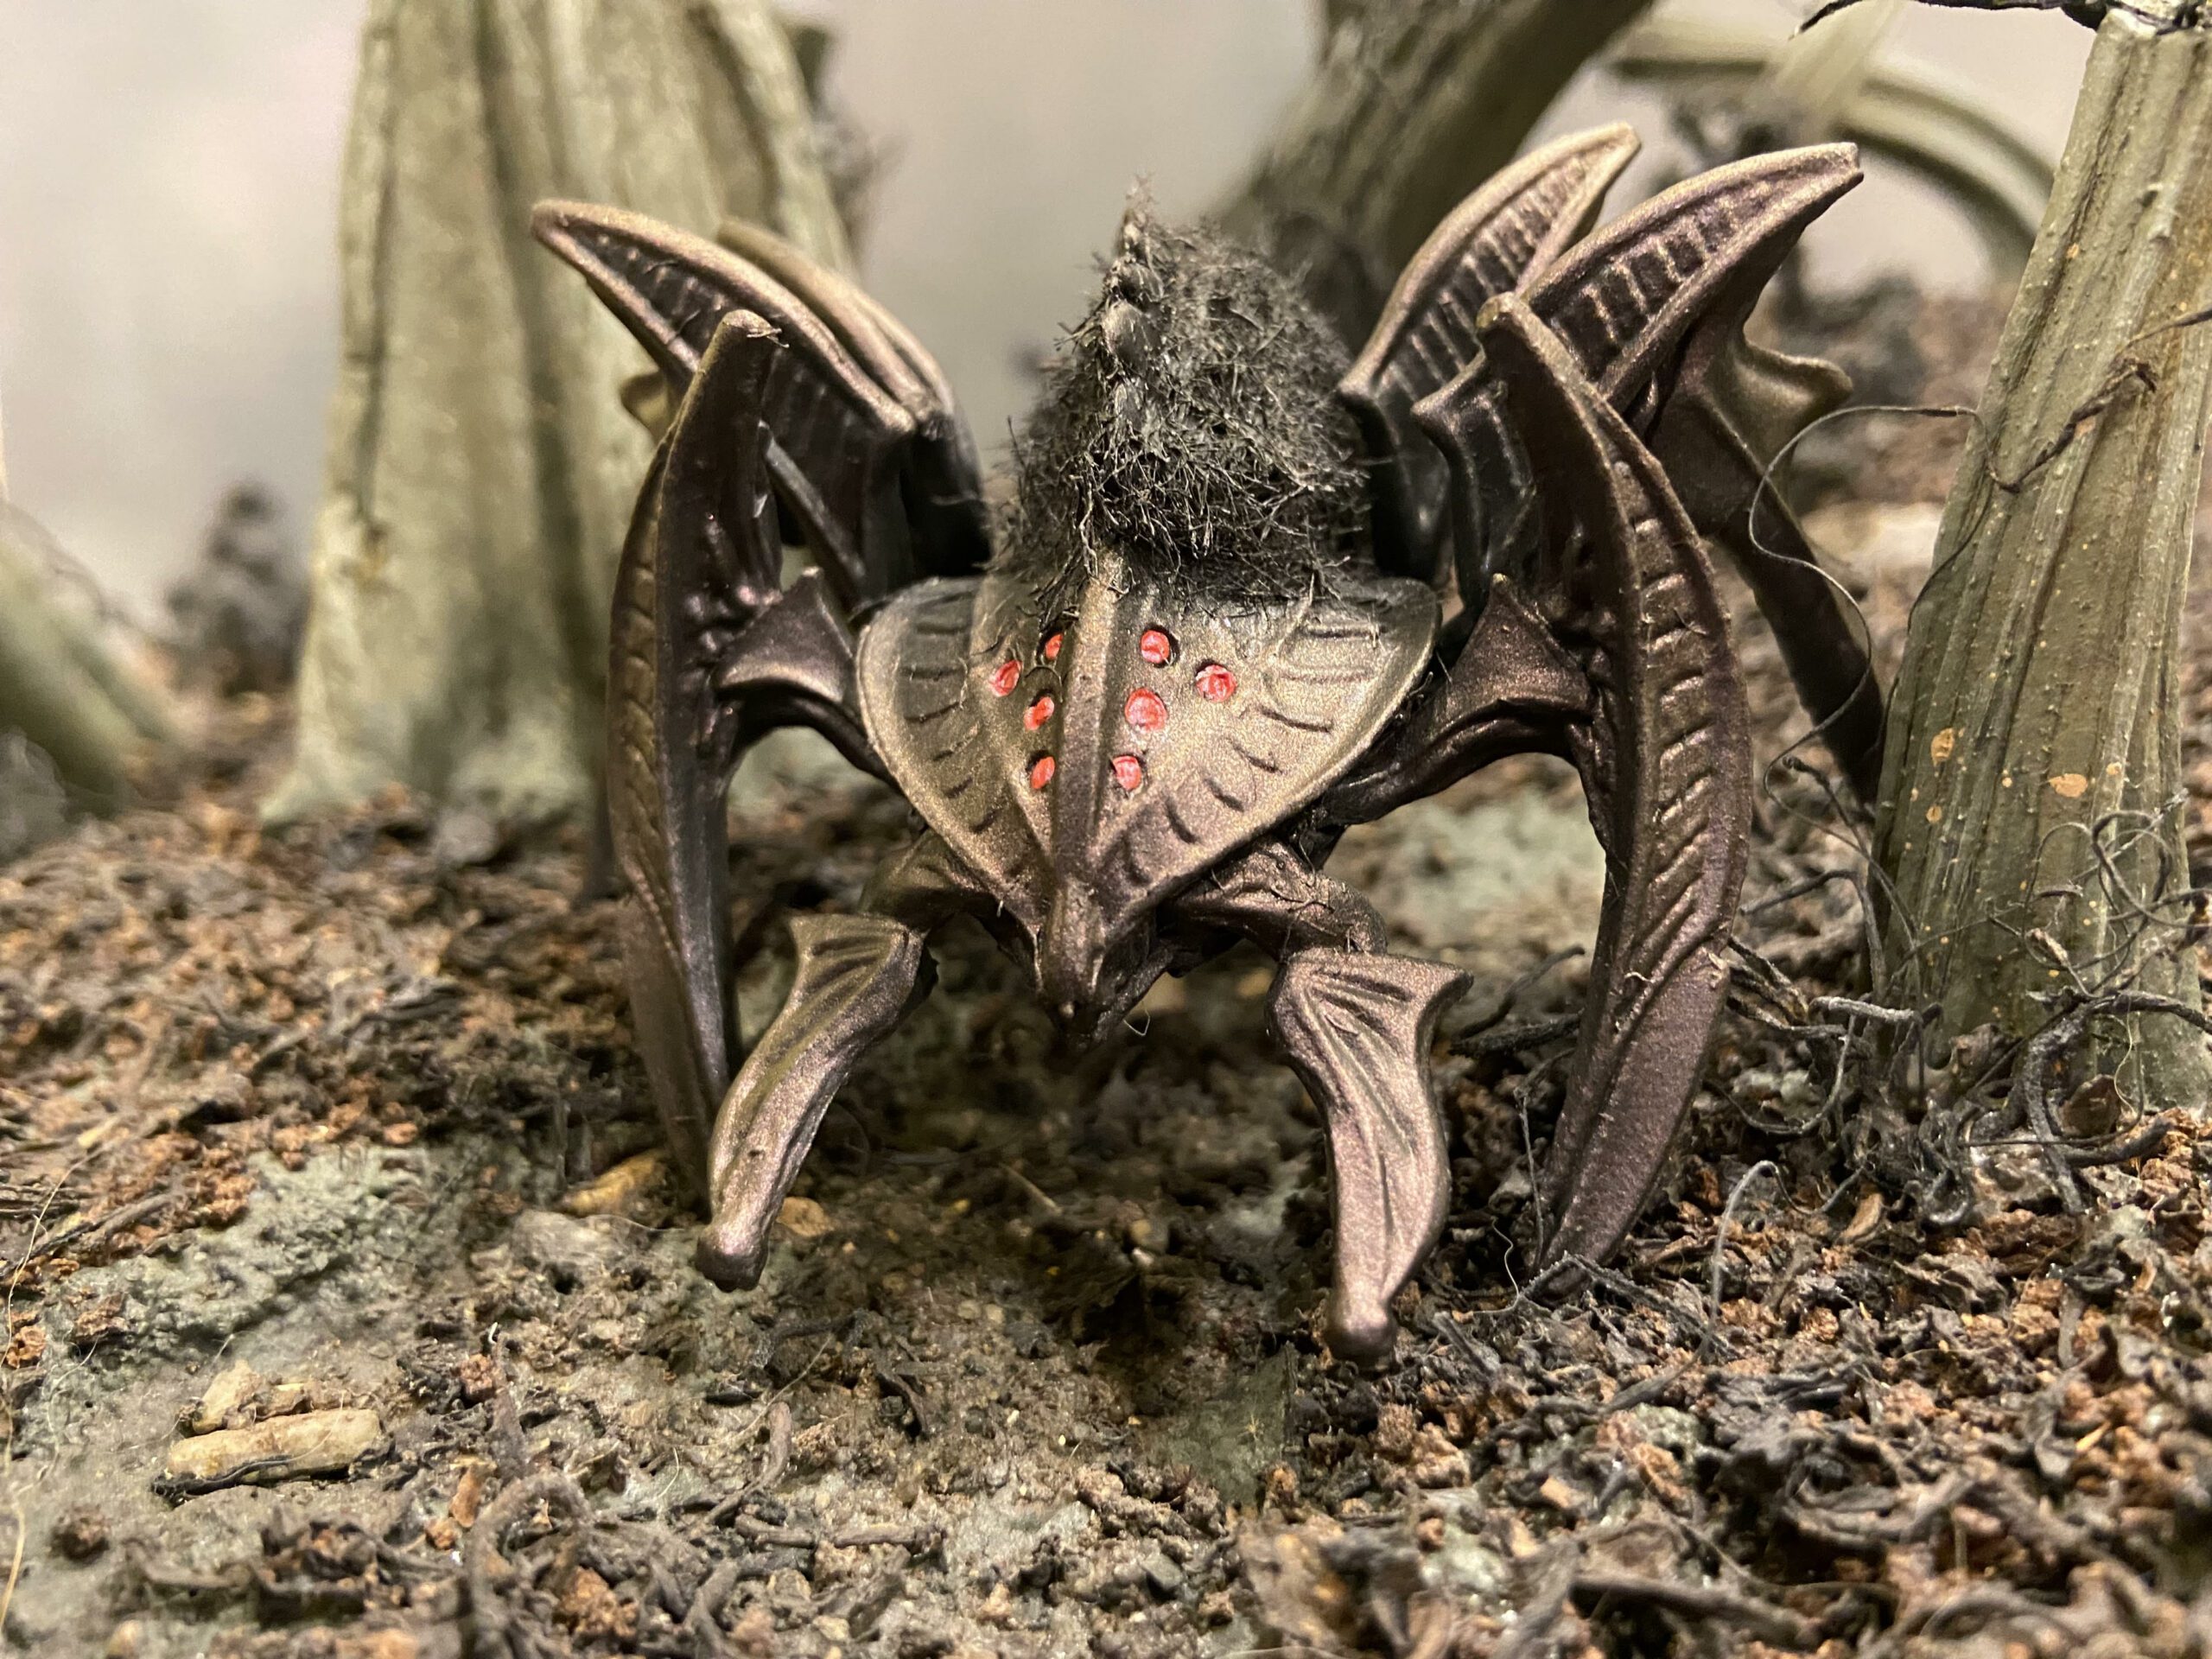 Final Faction toy spider drone customized into a wargaming miniature for Verrotwood